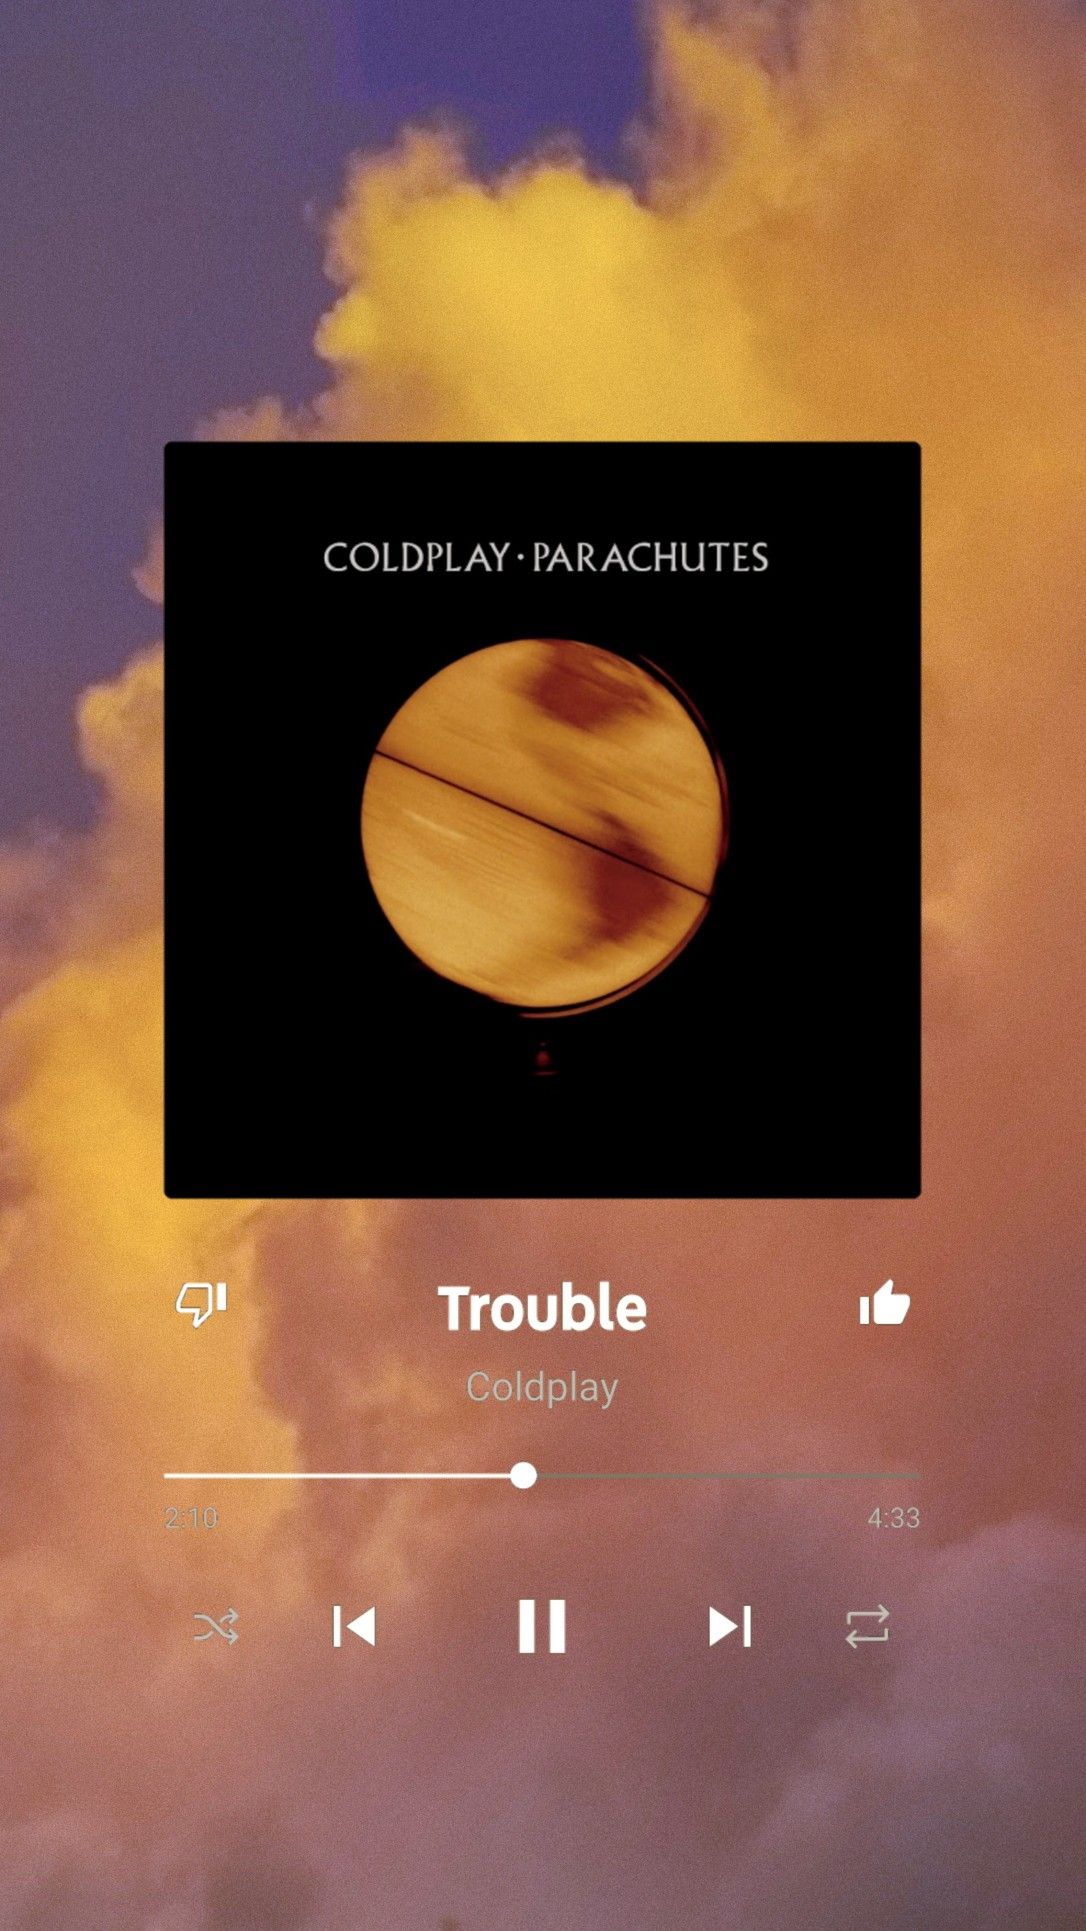 YouTube music Coldplay. Coldplay